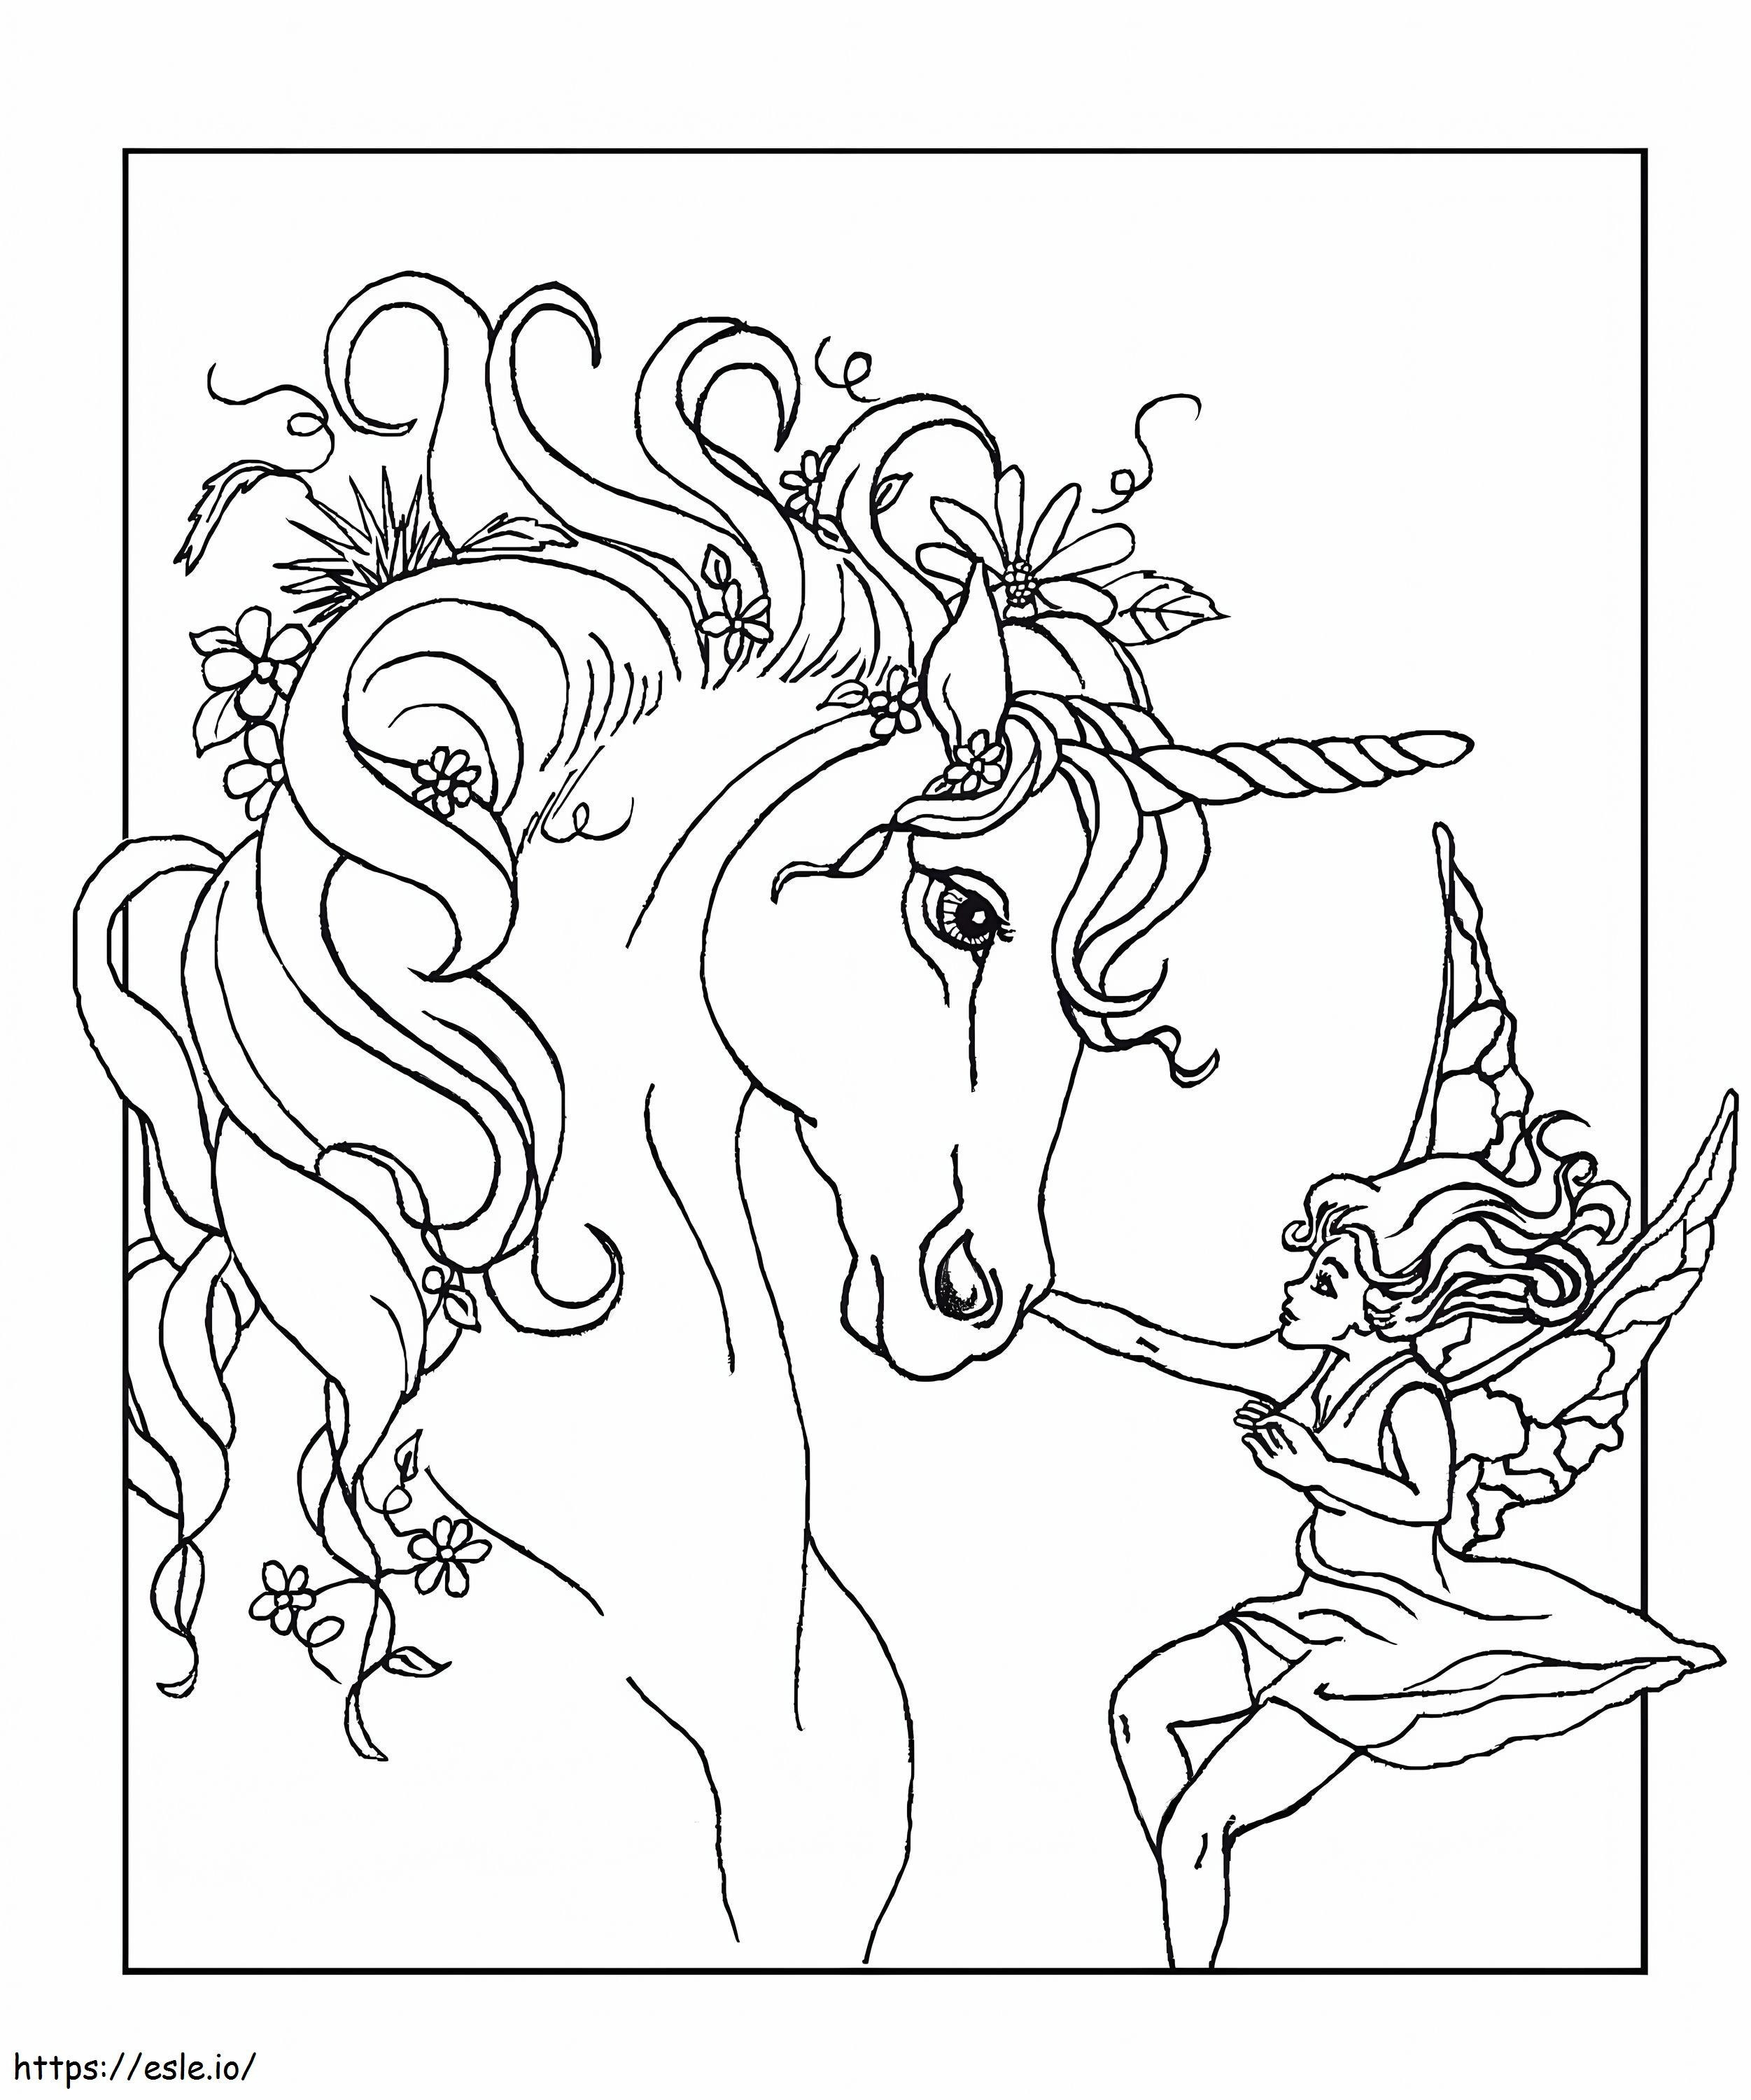 Unicorn And Fairy coloring page